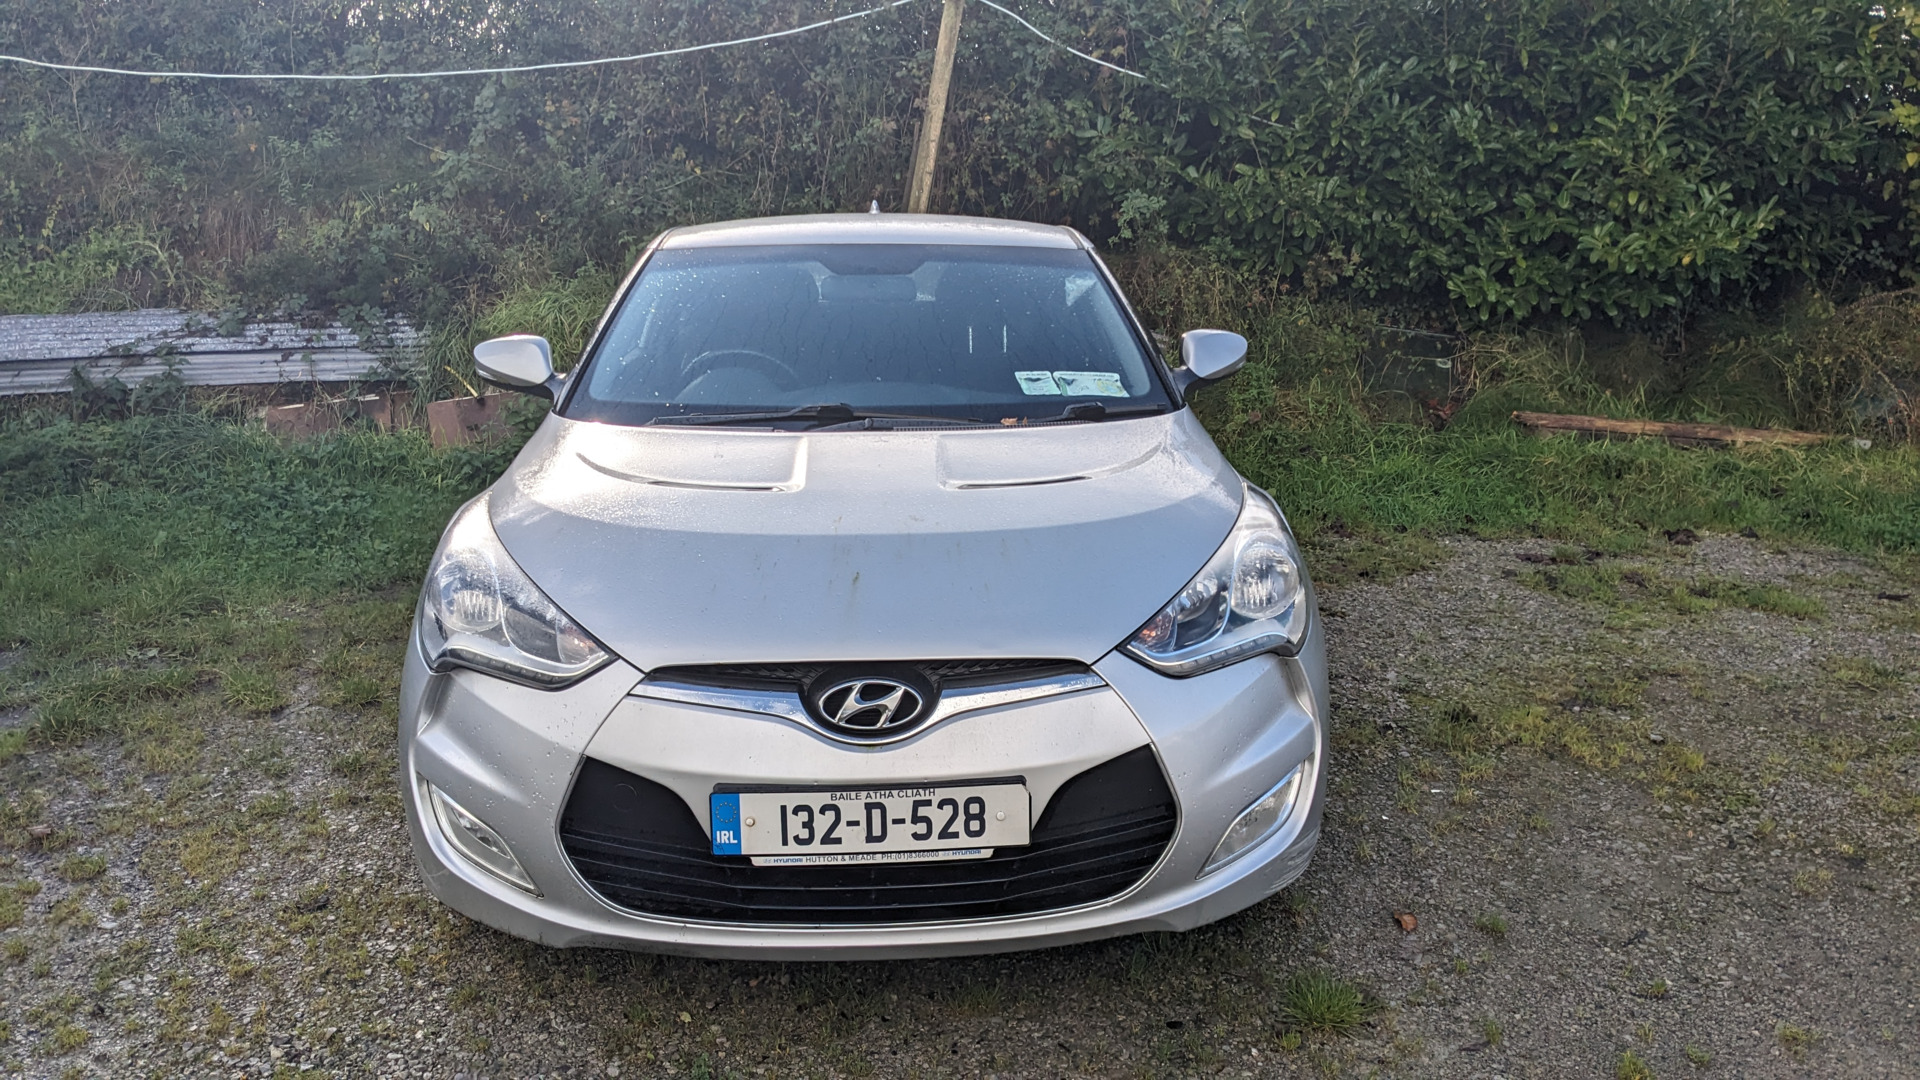 Used Hyundai Veloster 2013 in Meath